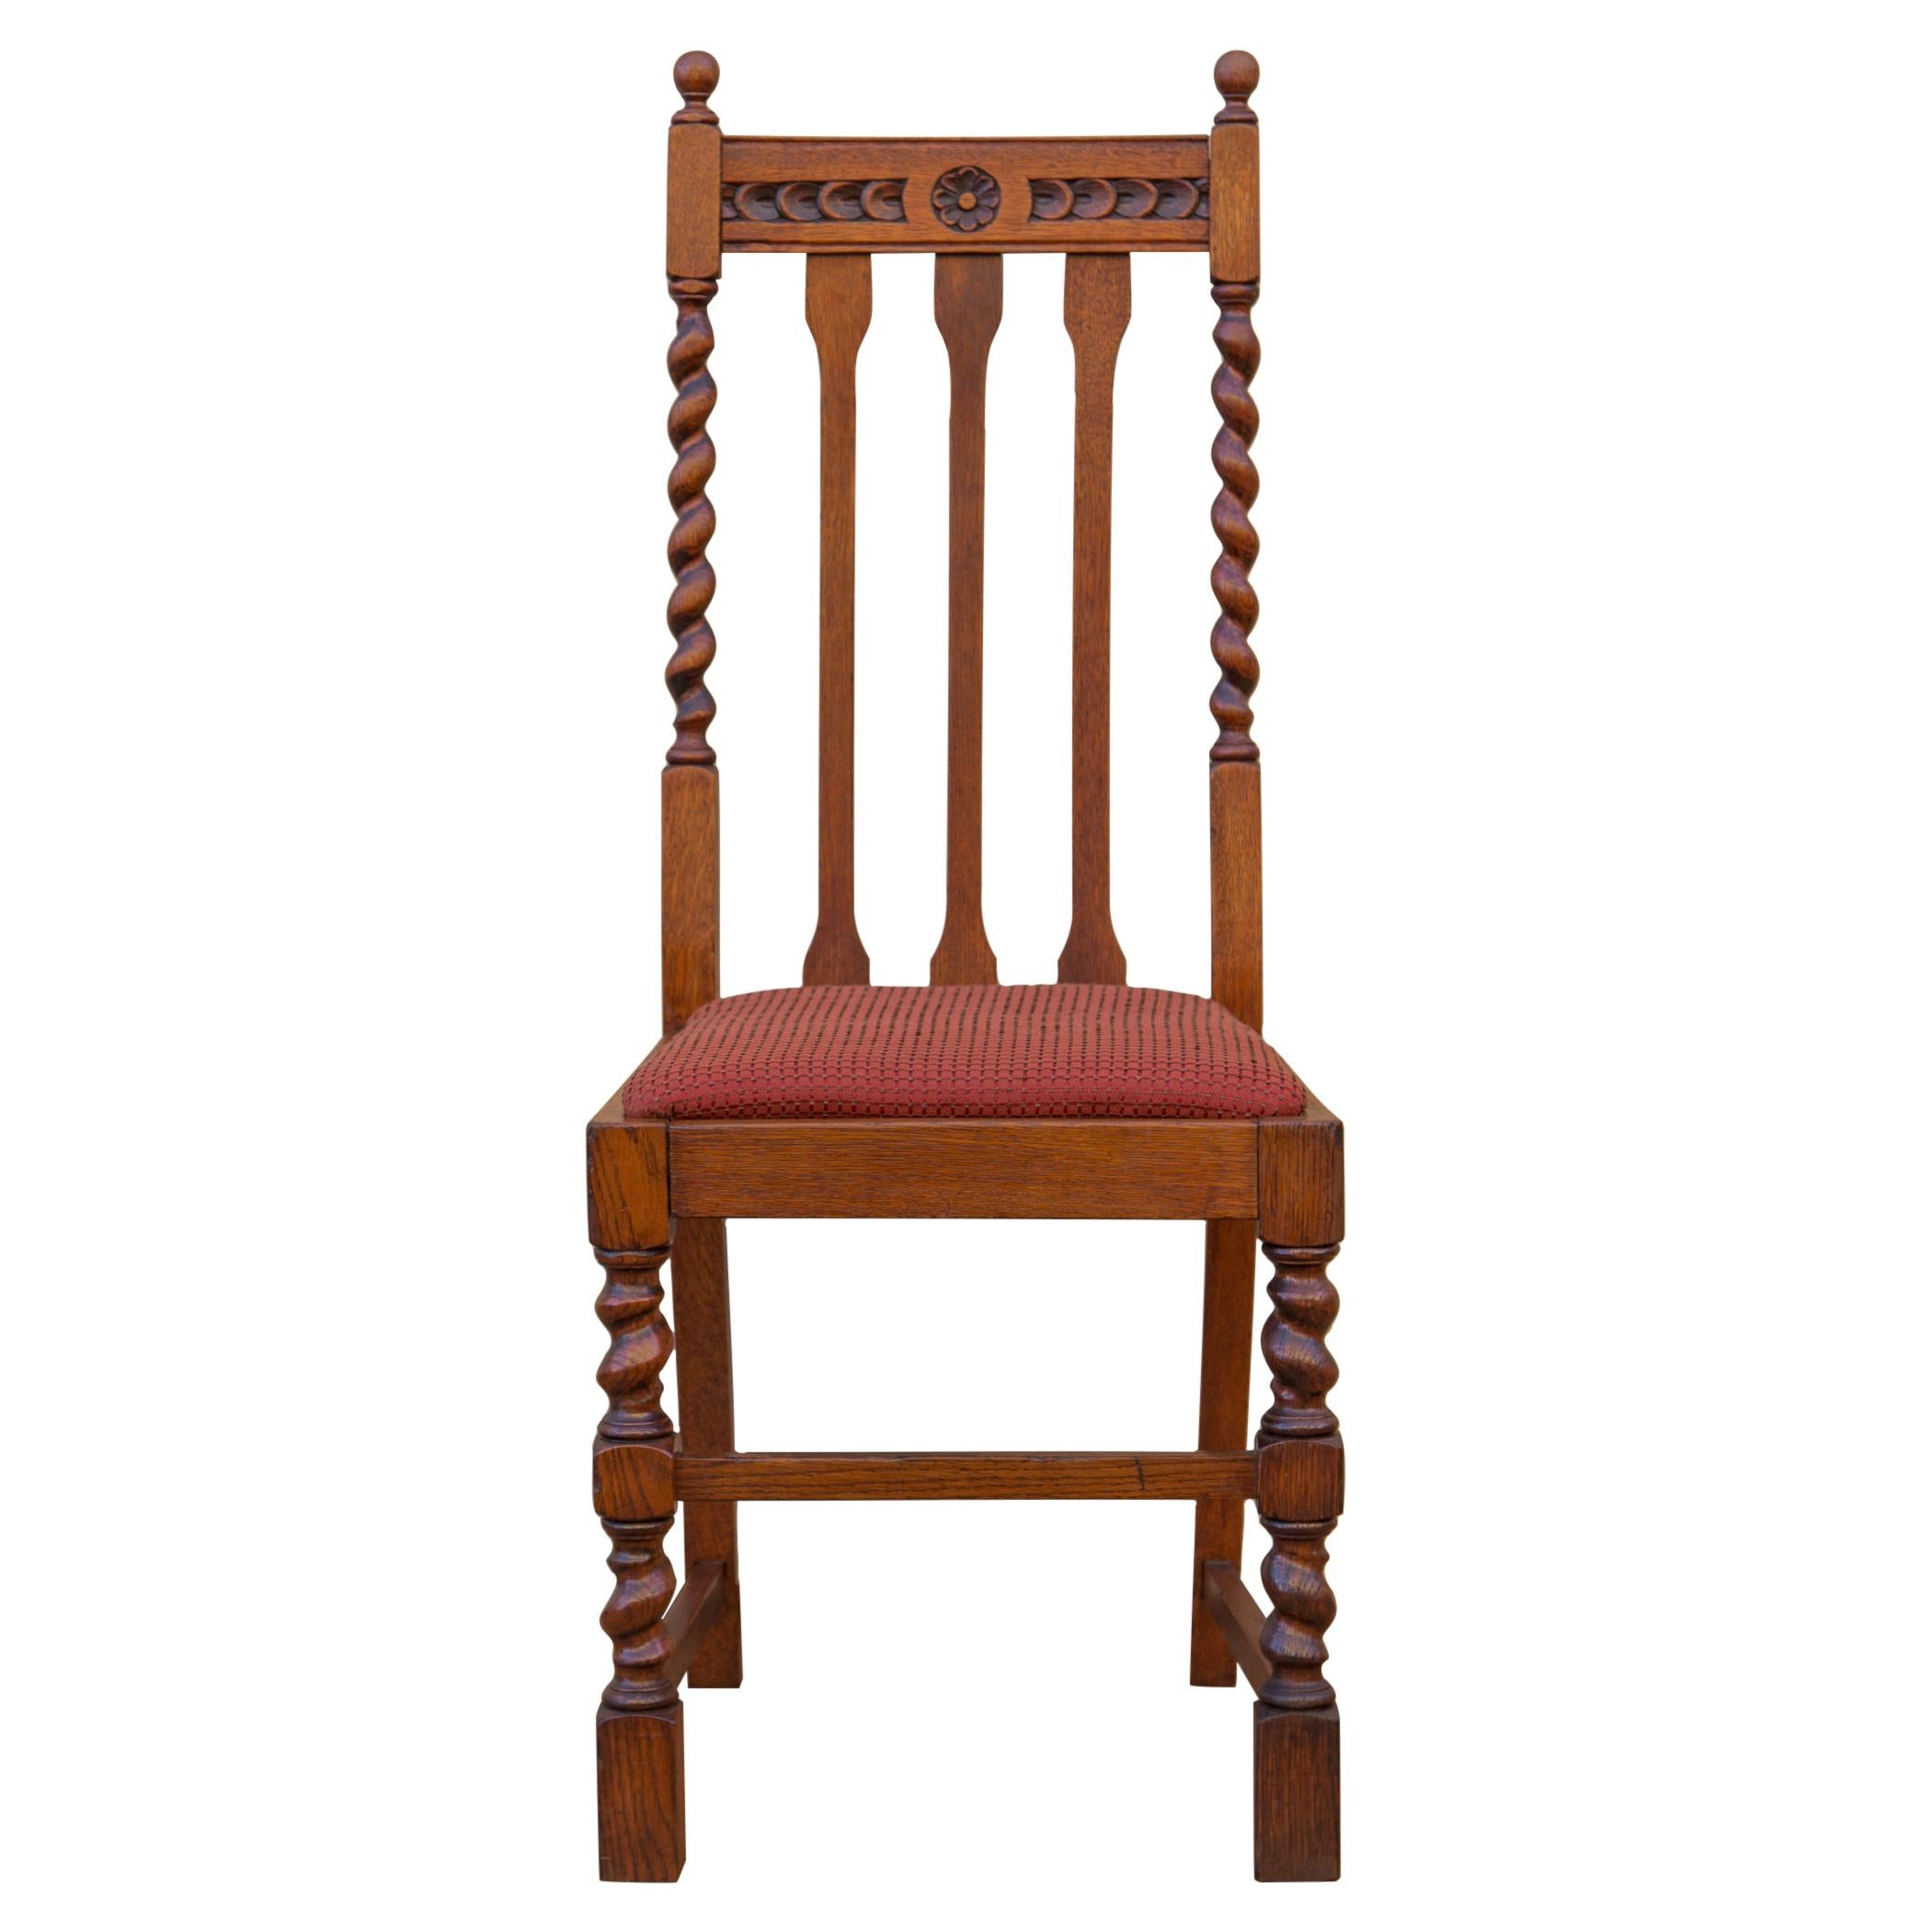 Shipping. Maker not on list.

Antique solid oak high back Edwardian barley twist side chair or dining chair by John M Smyth & Co, c 1910. Attractive oak grain with rich dark honey color. Beautiful hand-carved detail on crest rail with barley twist